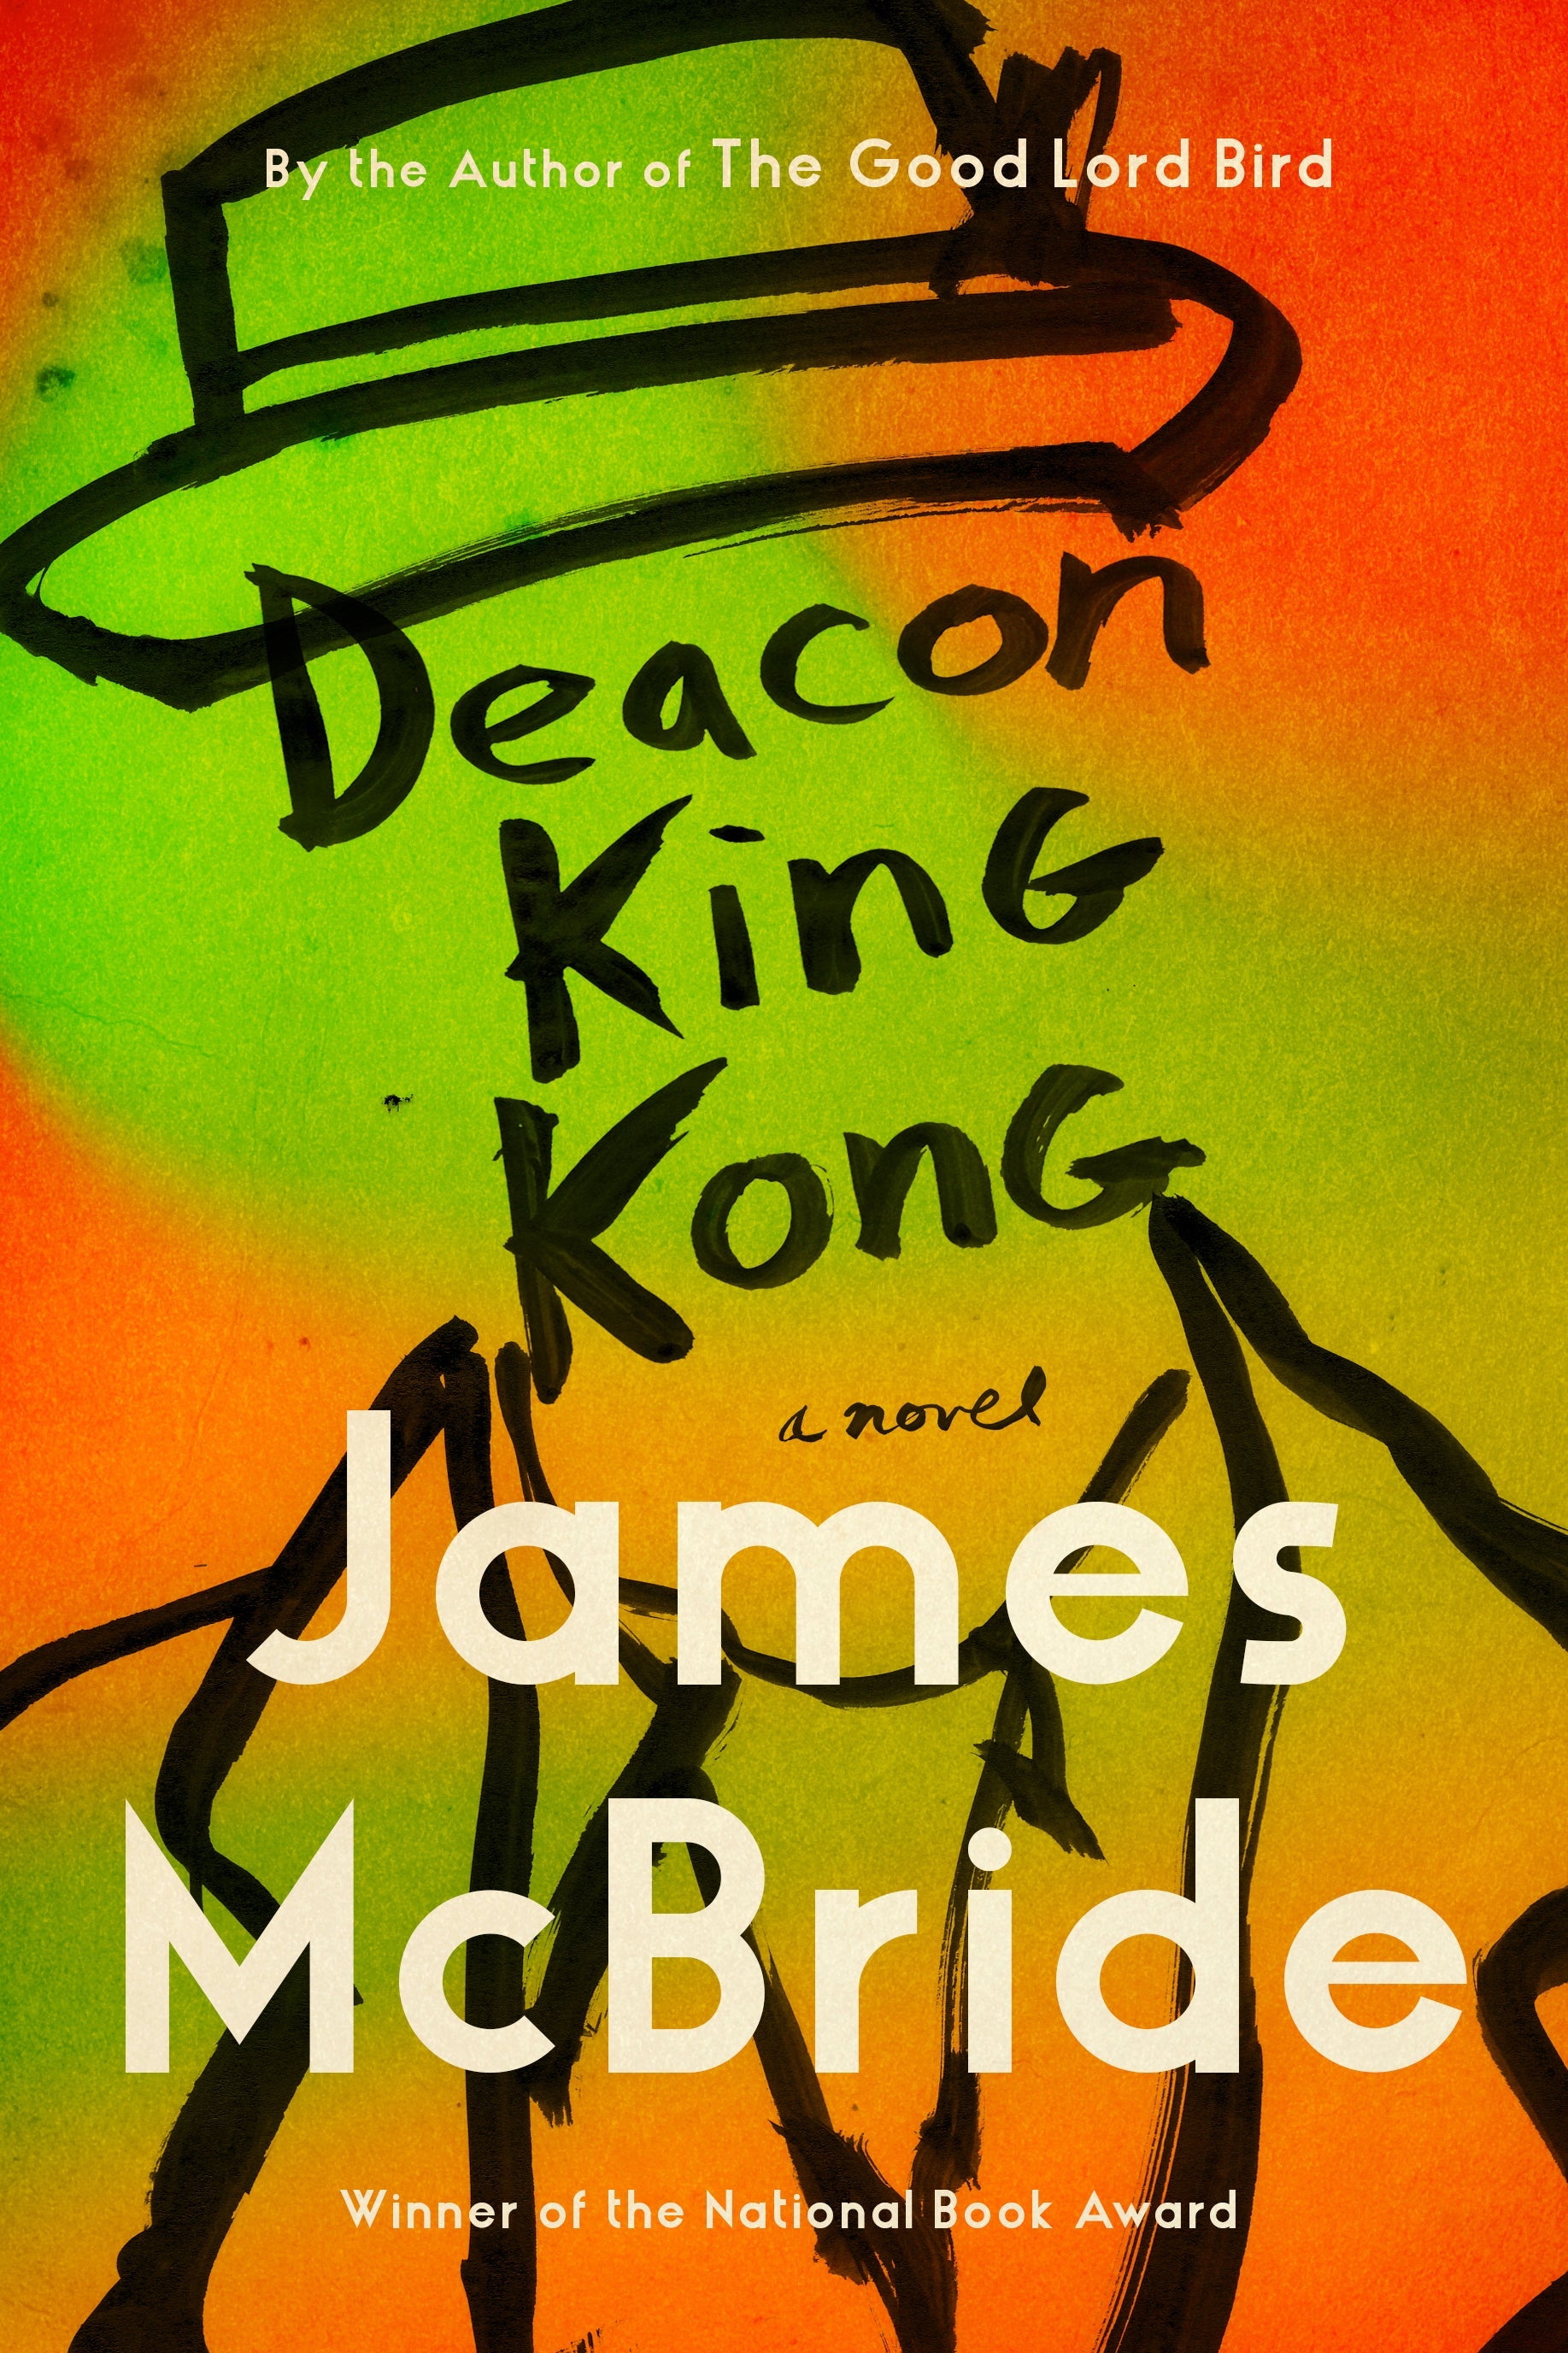 The book jacket of Deacon King Kong